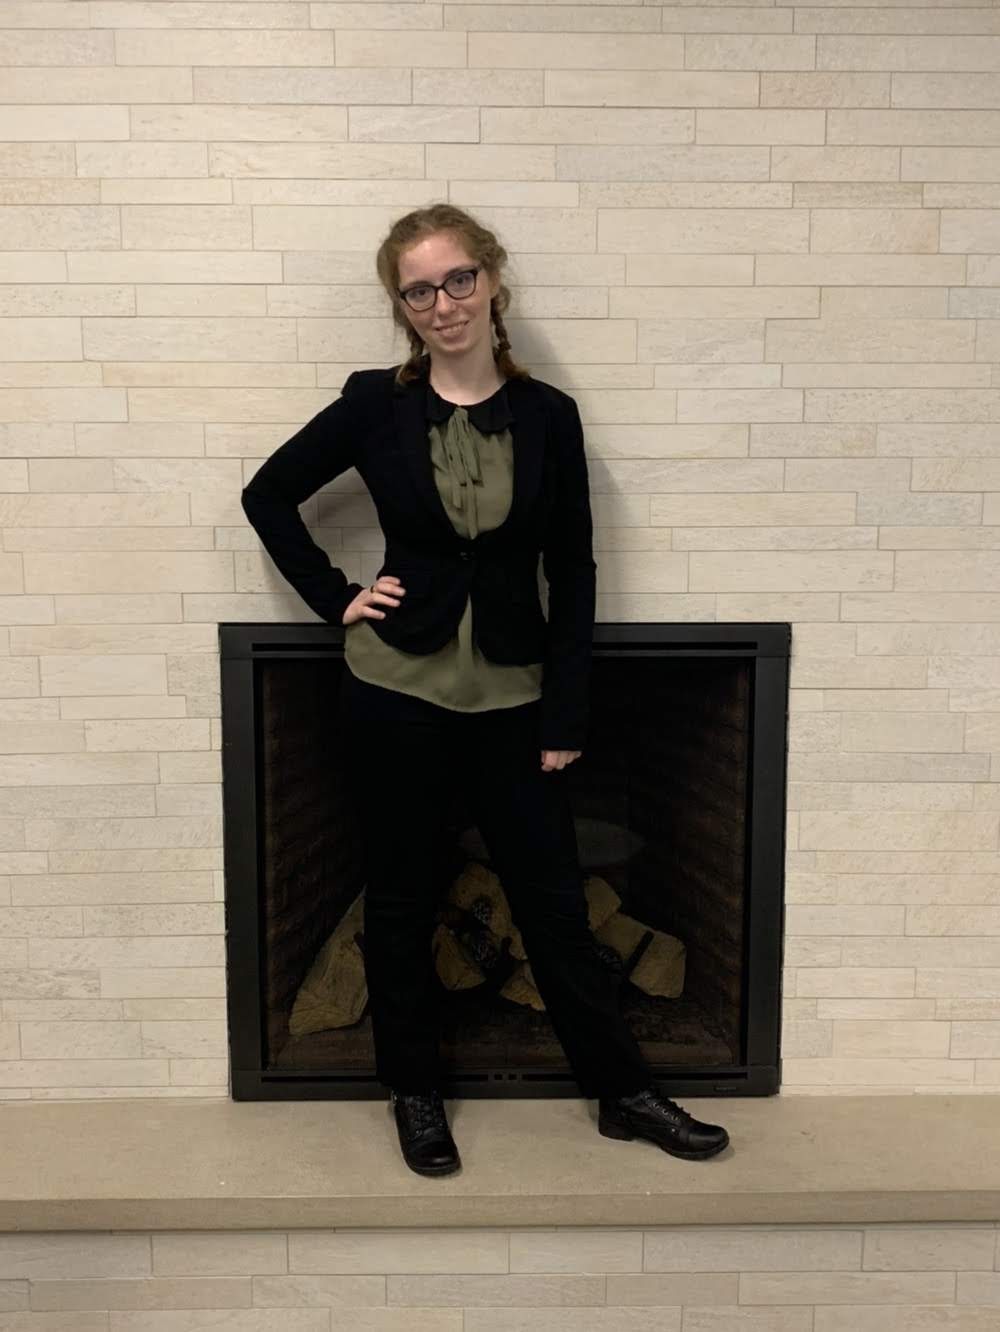 Kelsey Warning stands in front of a fireplace with her hands on her hips